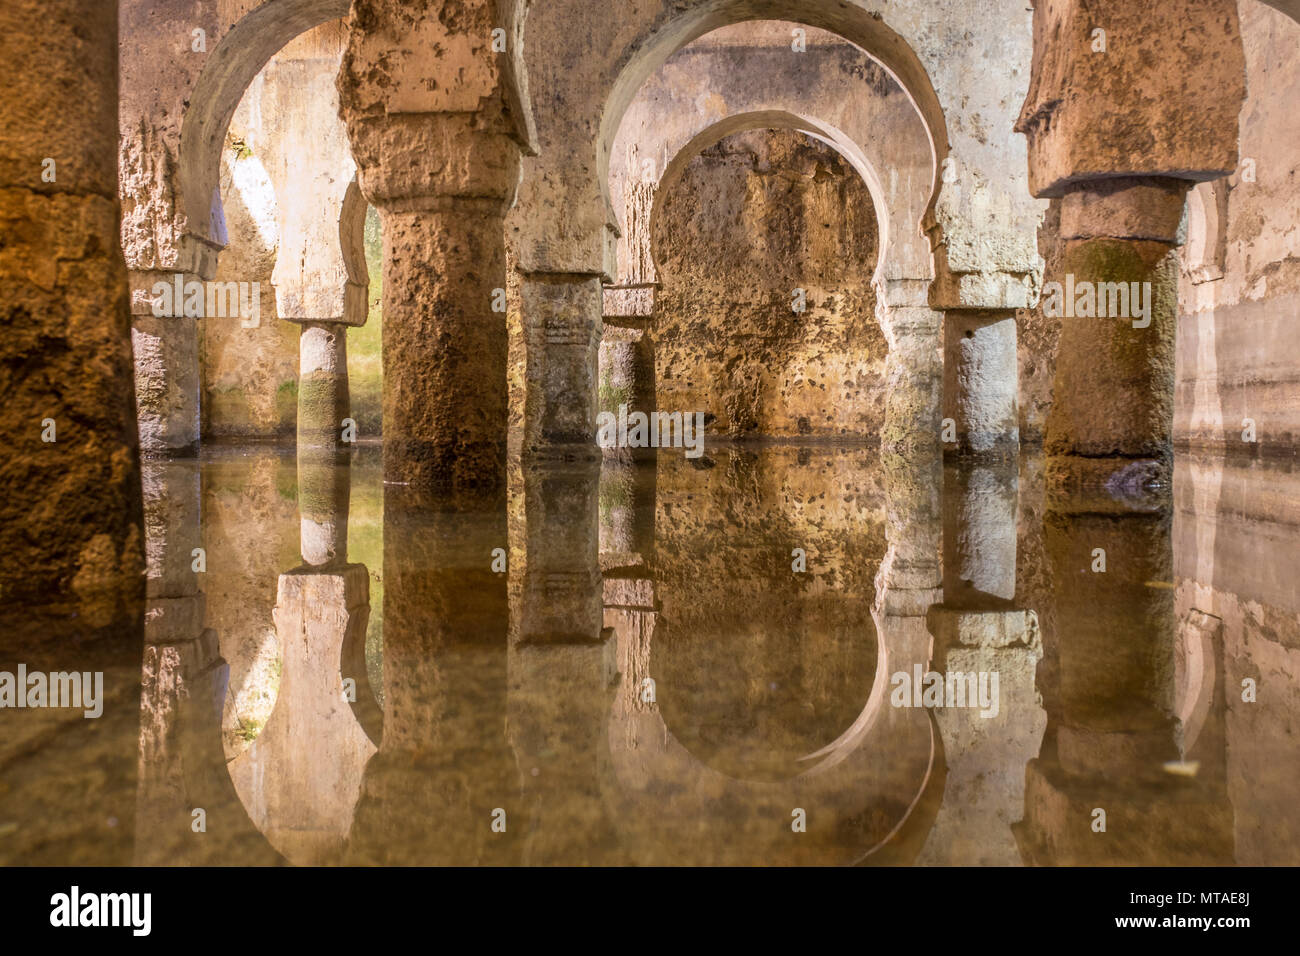 Arab cistern or Aljibe, former mosque during the Medieval Muslims Rule in Spain, Caceres Stock Photo